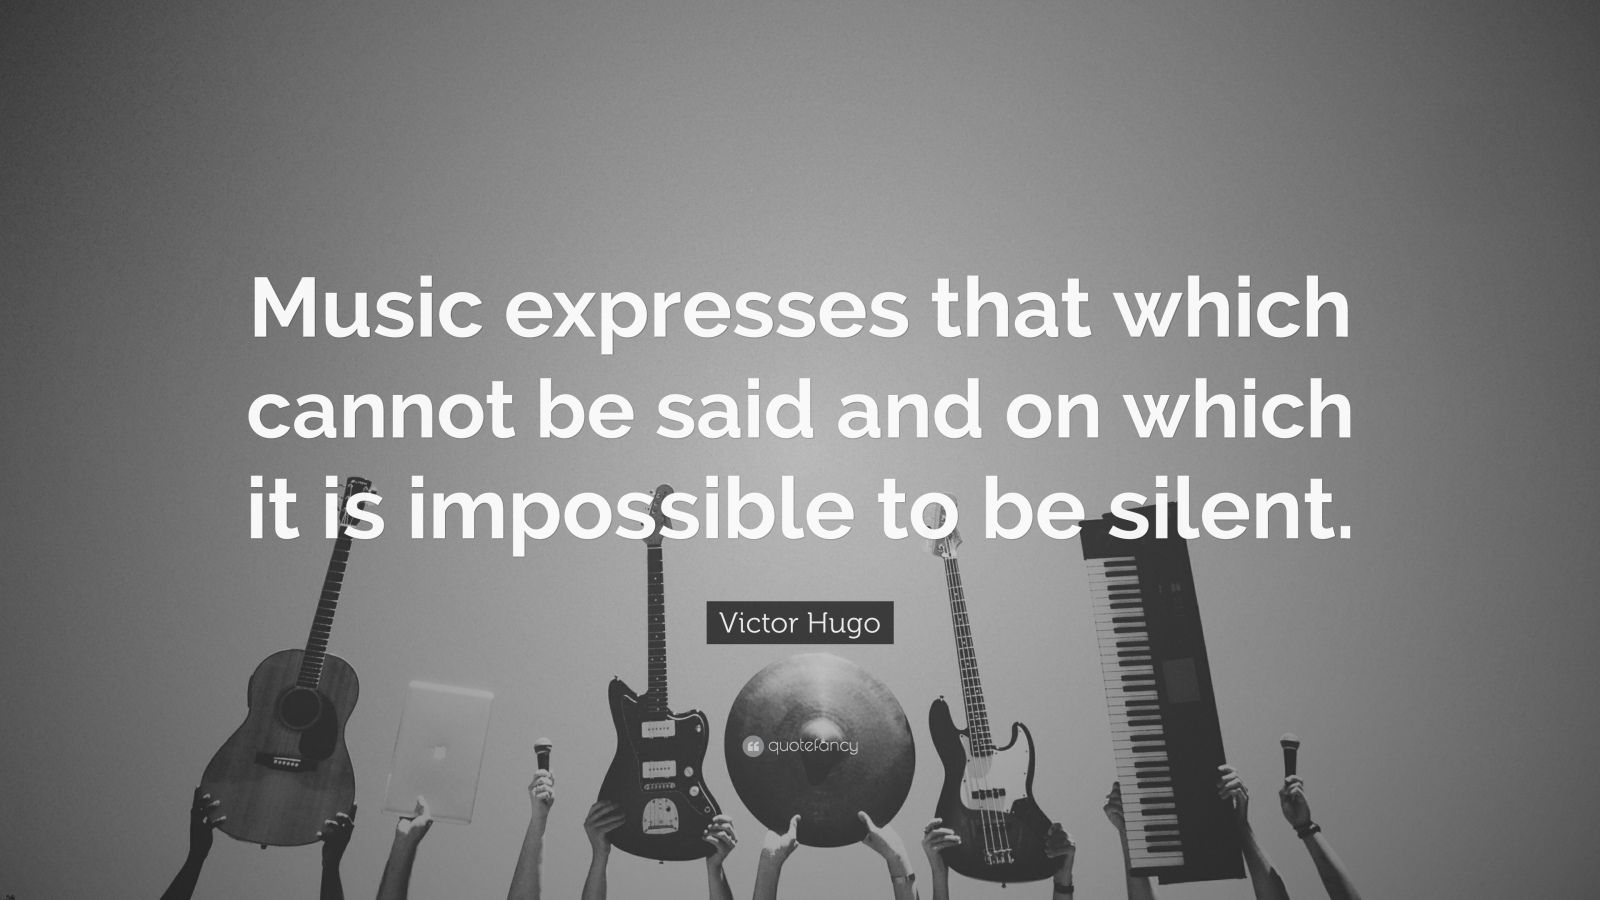 Victor Hugo Quote: "Music expresses that which cannot be ...